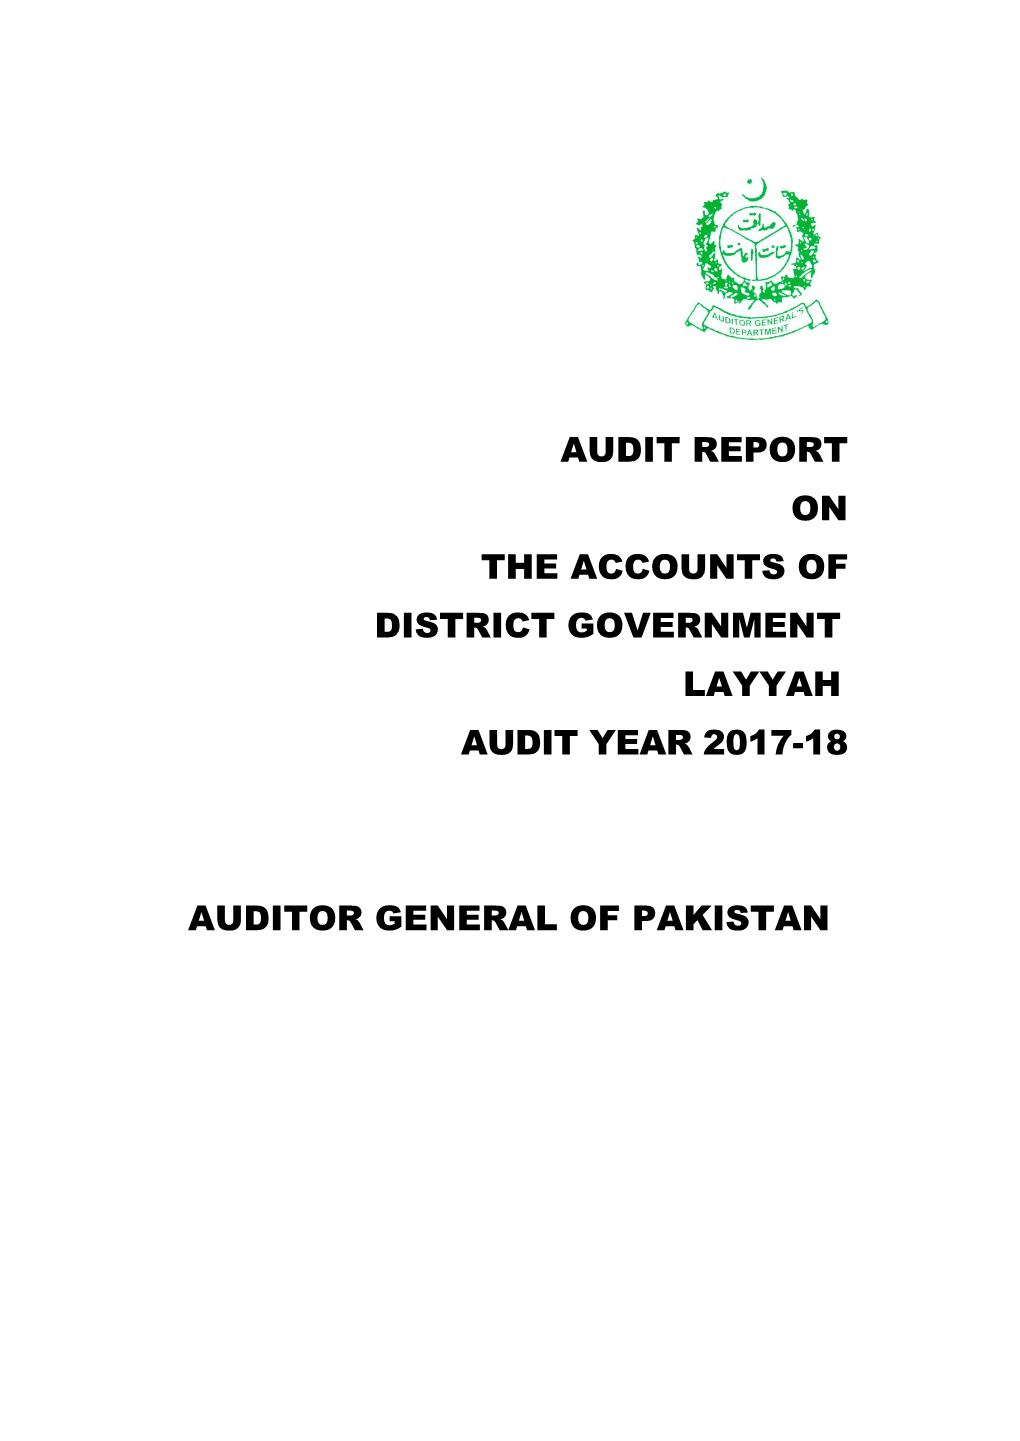 Audit Report on the Accounts of District Government Layyah Audit Year 2017-18